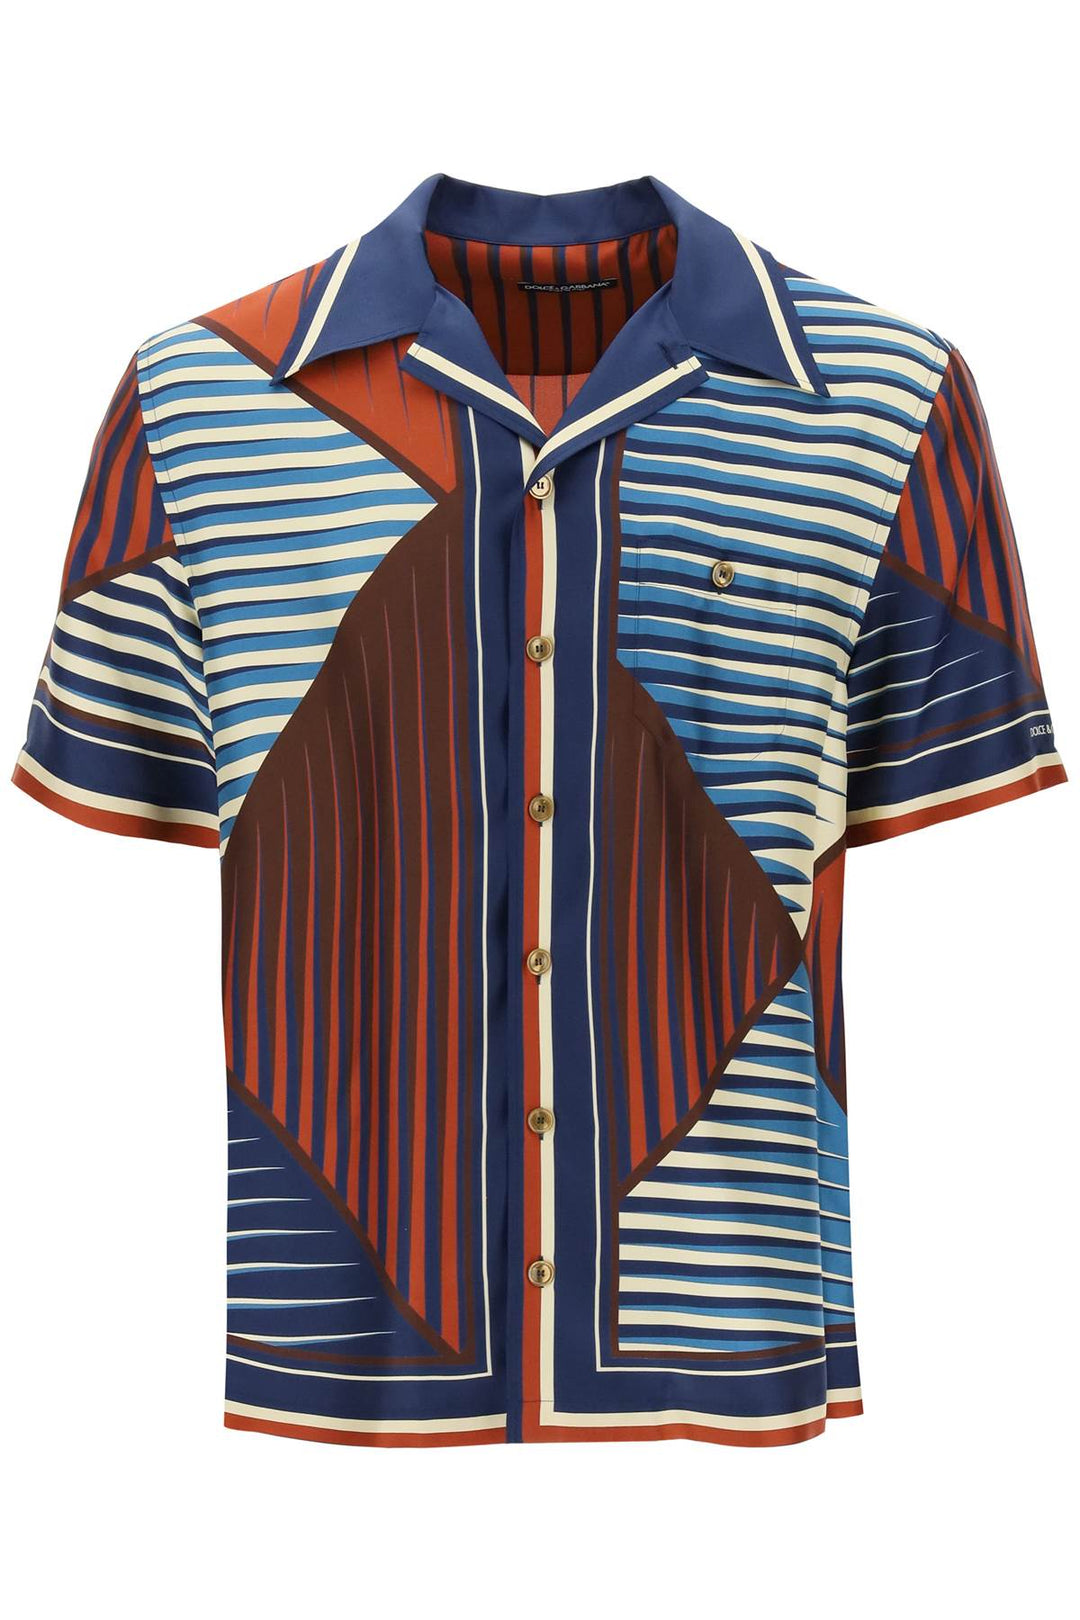 Dolce & Gabbana Replace With Double Quotegeometric Pattern Bowling Shirt With   Blu